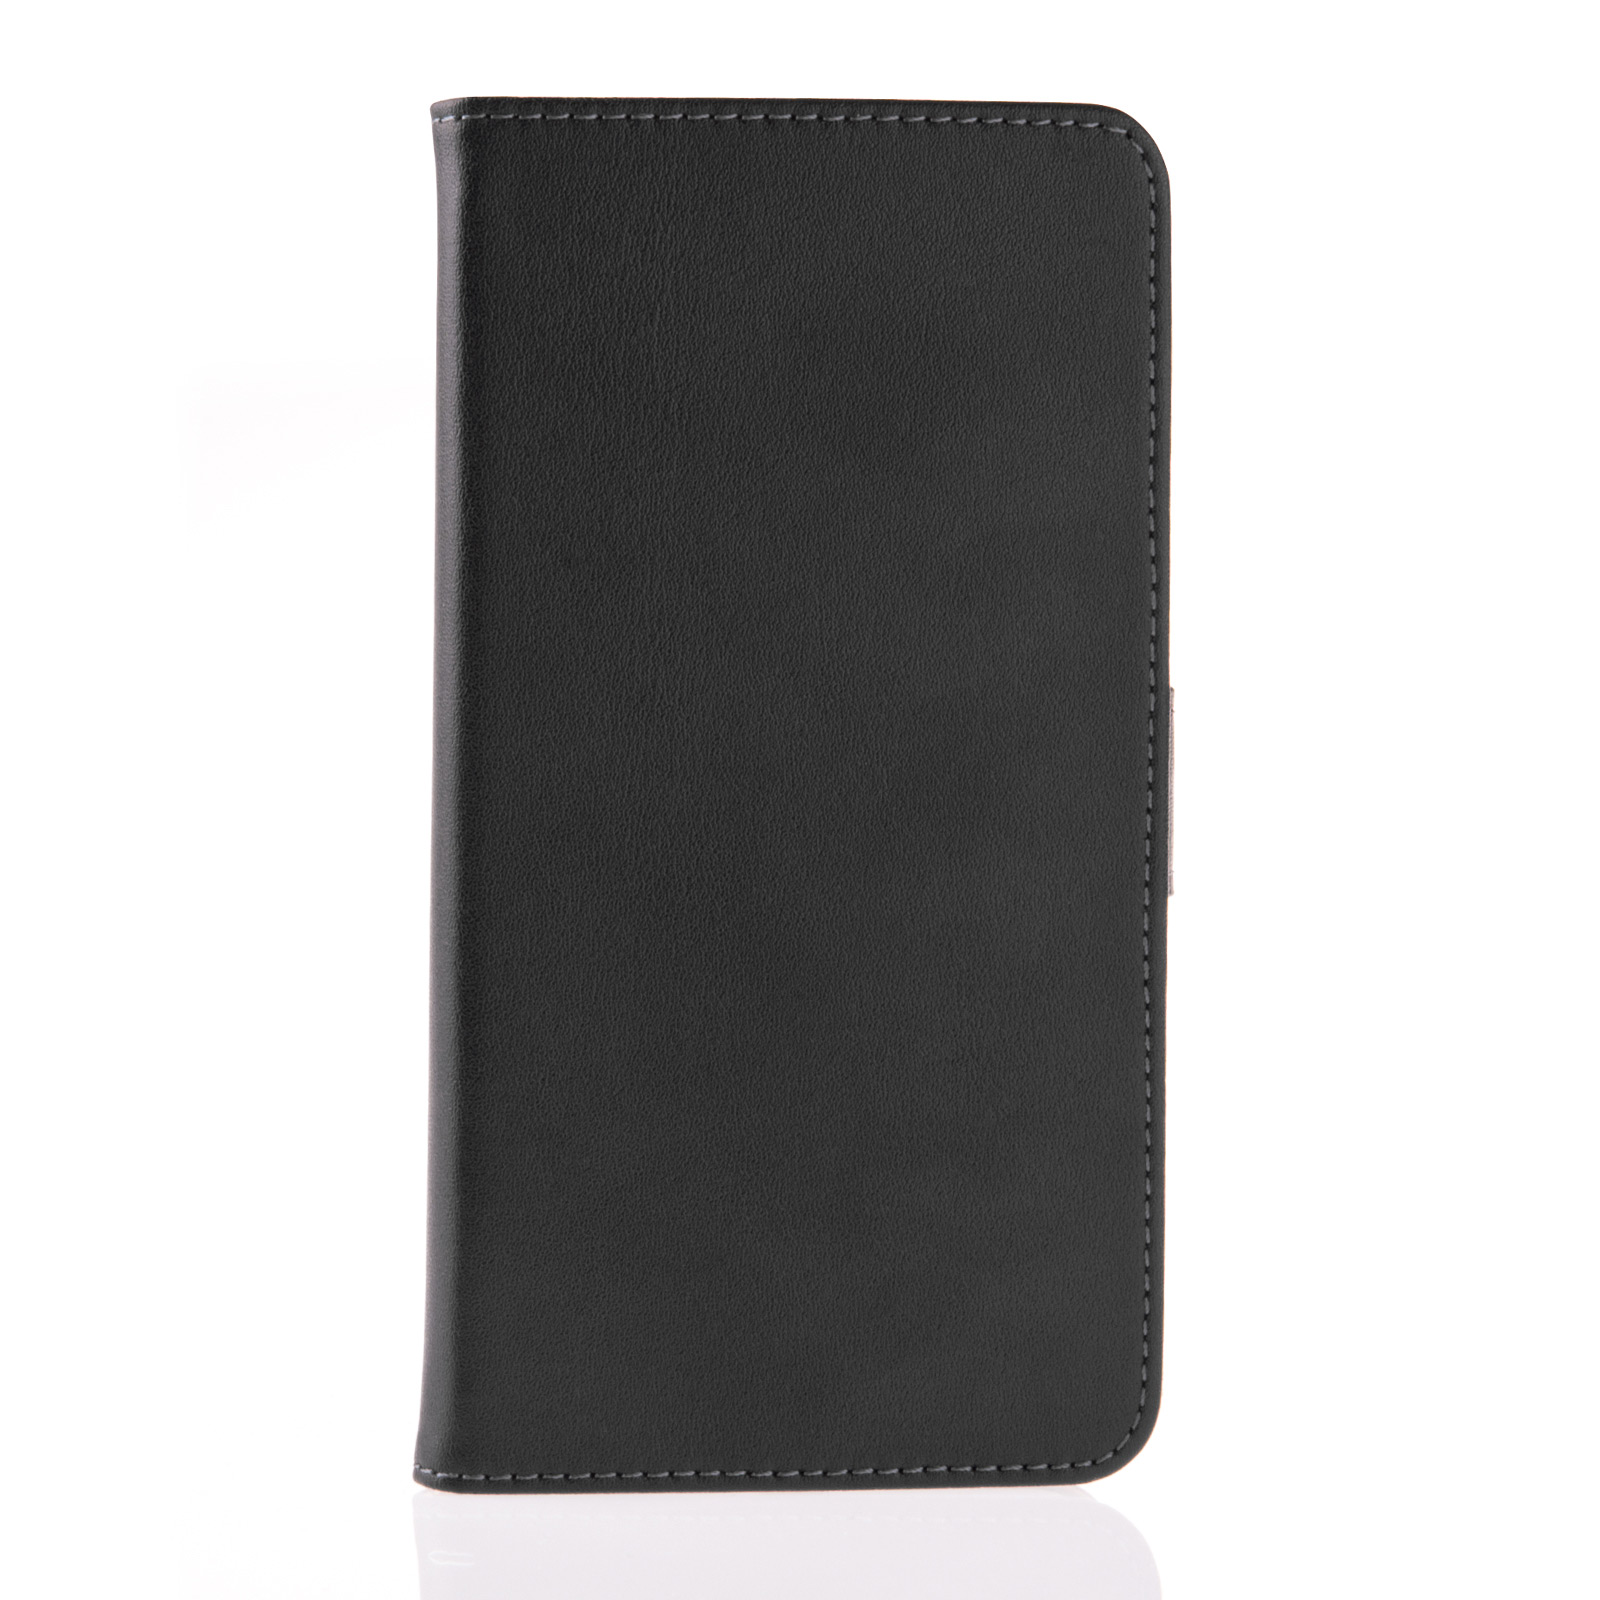 Caseflex iPhone 6 Plus and 6s Plus Real Leather Wallet Case - Black